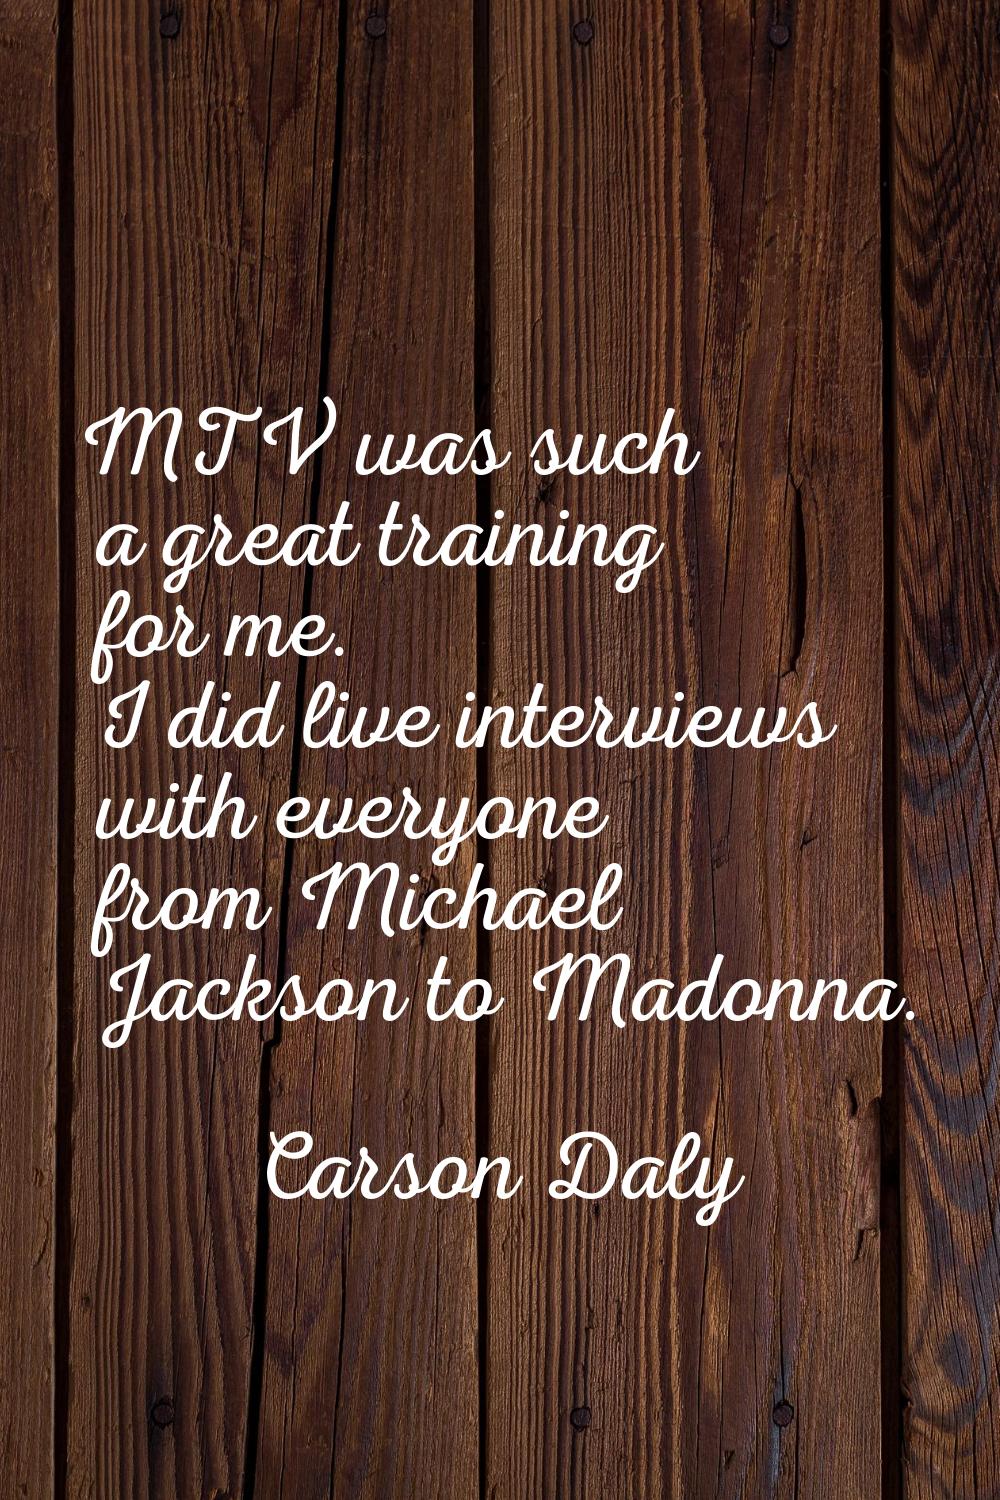 MTV was such a great training for me. I did live interviews with everyone from Michael Jackson to M